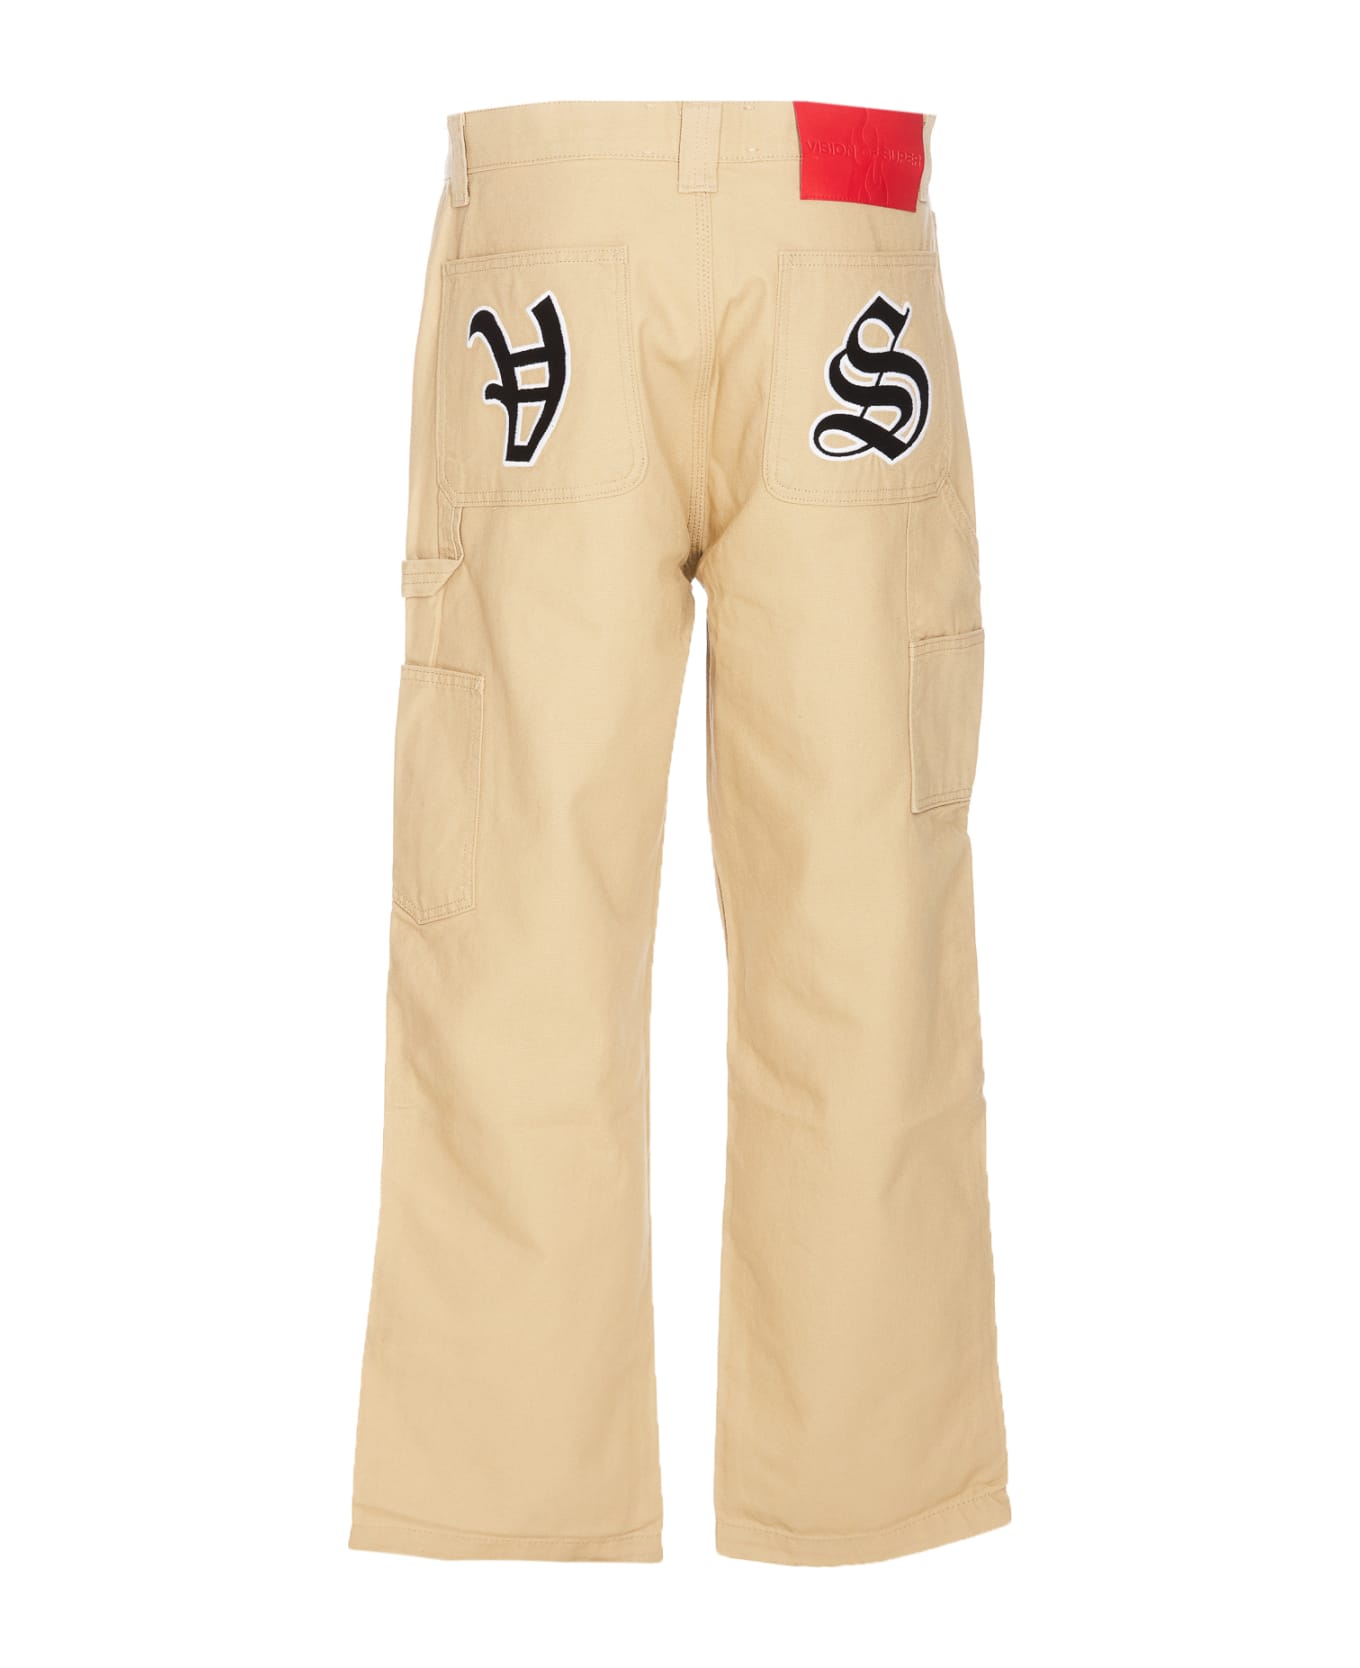 Vision of Super Sand Worker Pants With V-s Gothic Patches - Beige ボトムス